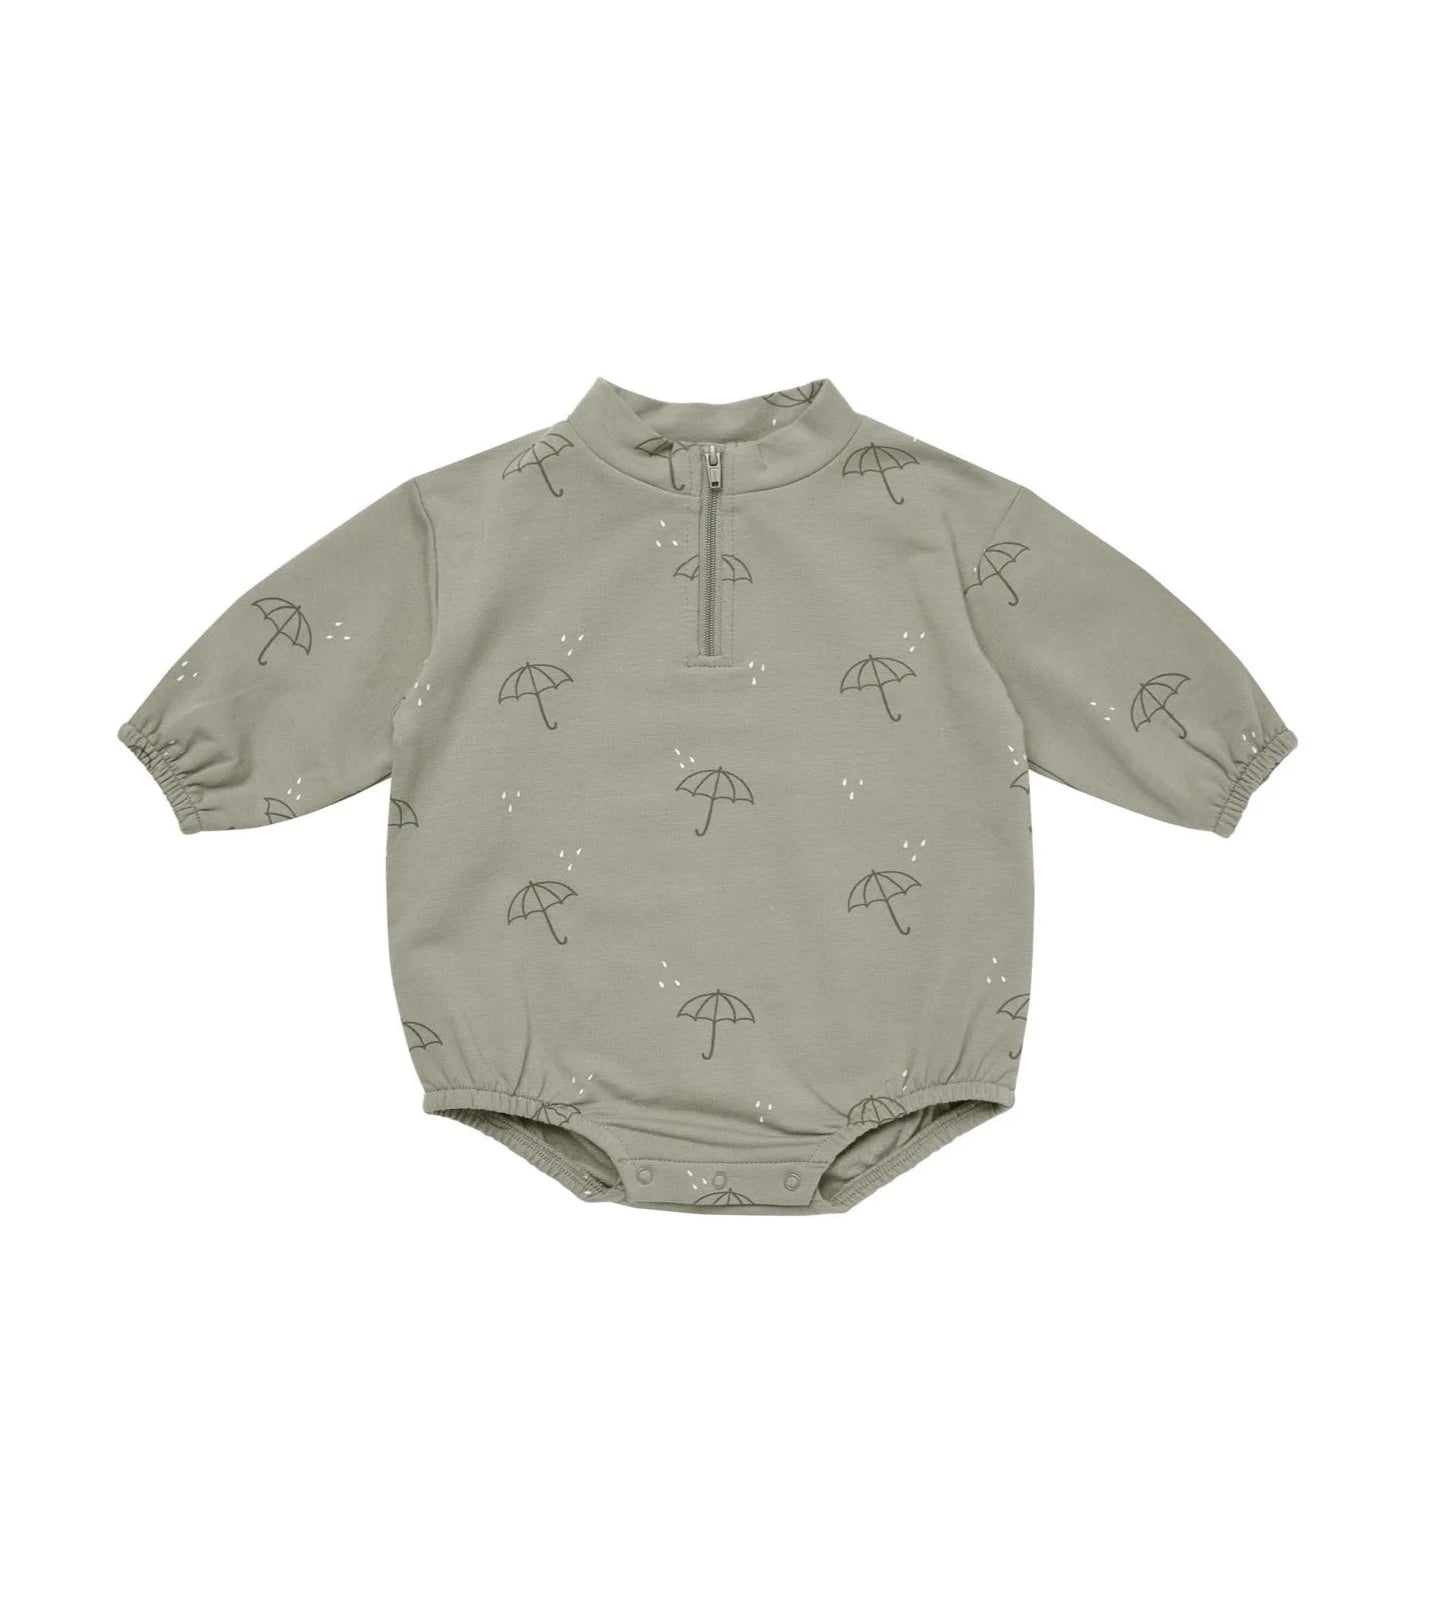 green long sleeve onesie with umbrellas and raindrops